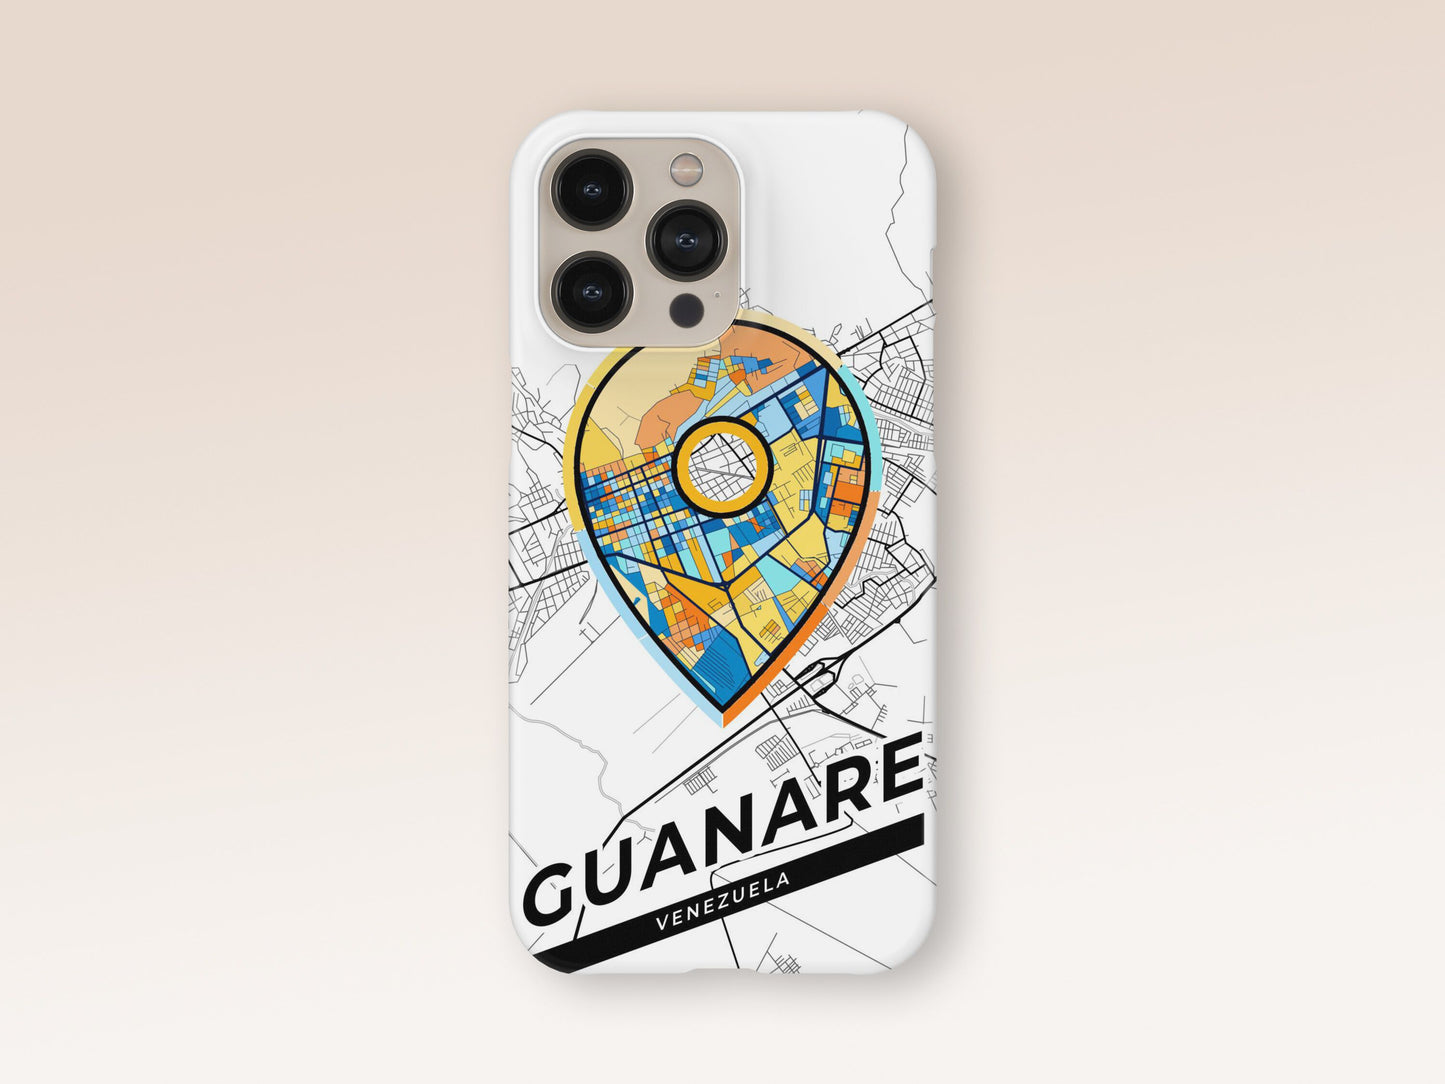 Guanare Venezuela slim phone case with colorful icon. Birthday, wedding or housewarming gift. Couple match cases. 1